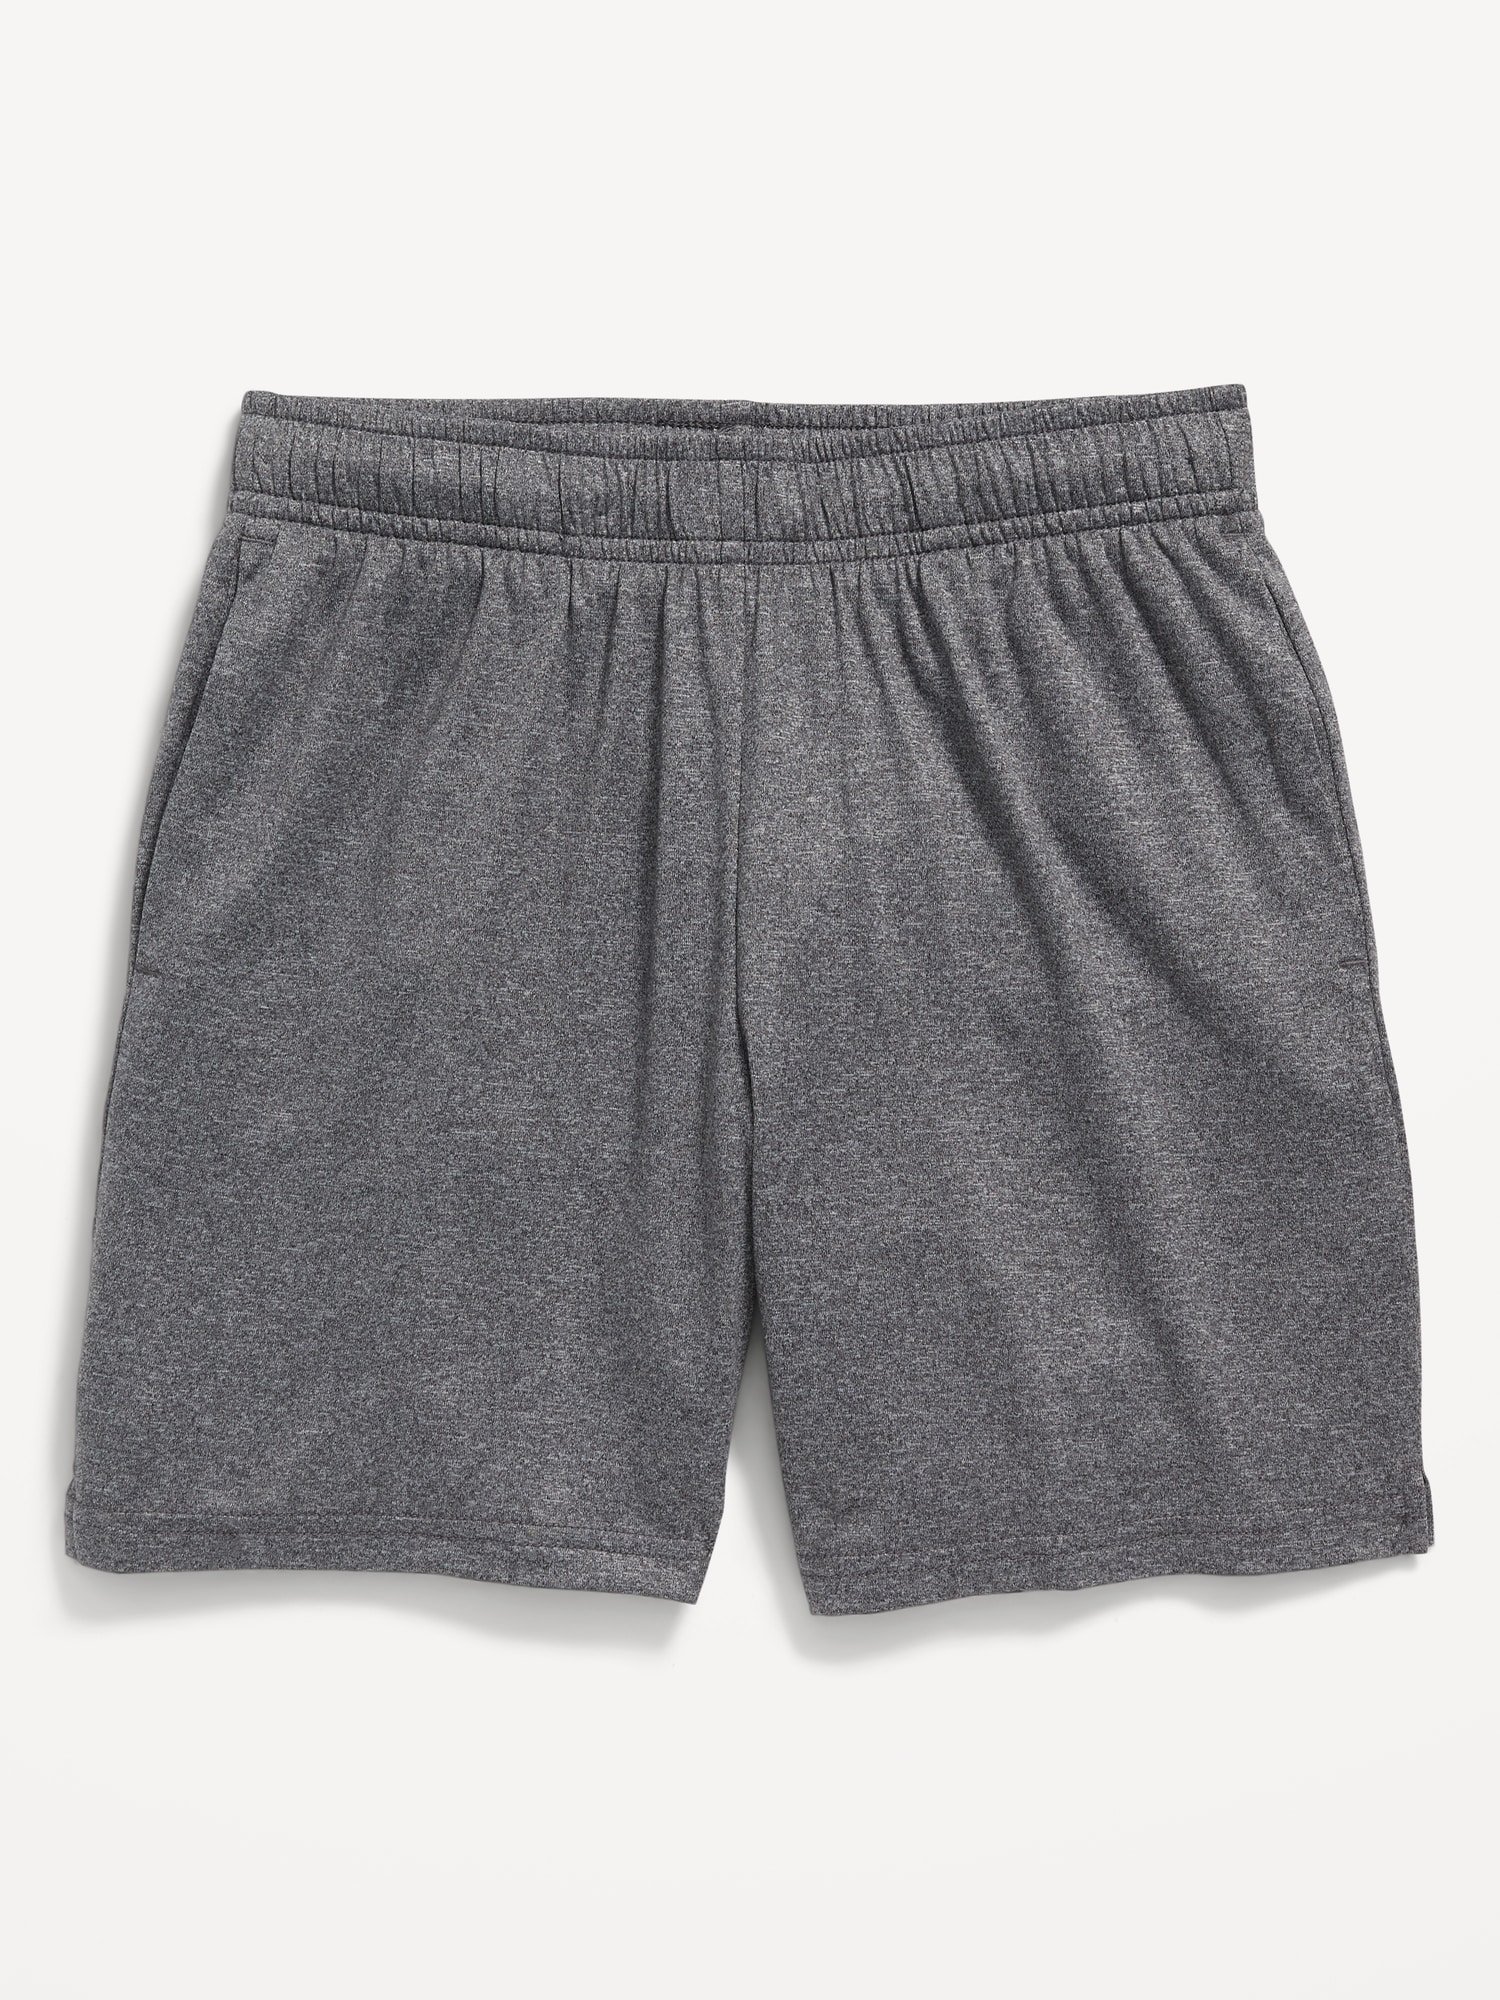 Old Navy Cloud 94 Soft Go-Dry Cool Performance Shorts for Boys (Above Knee) gray. 1